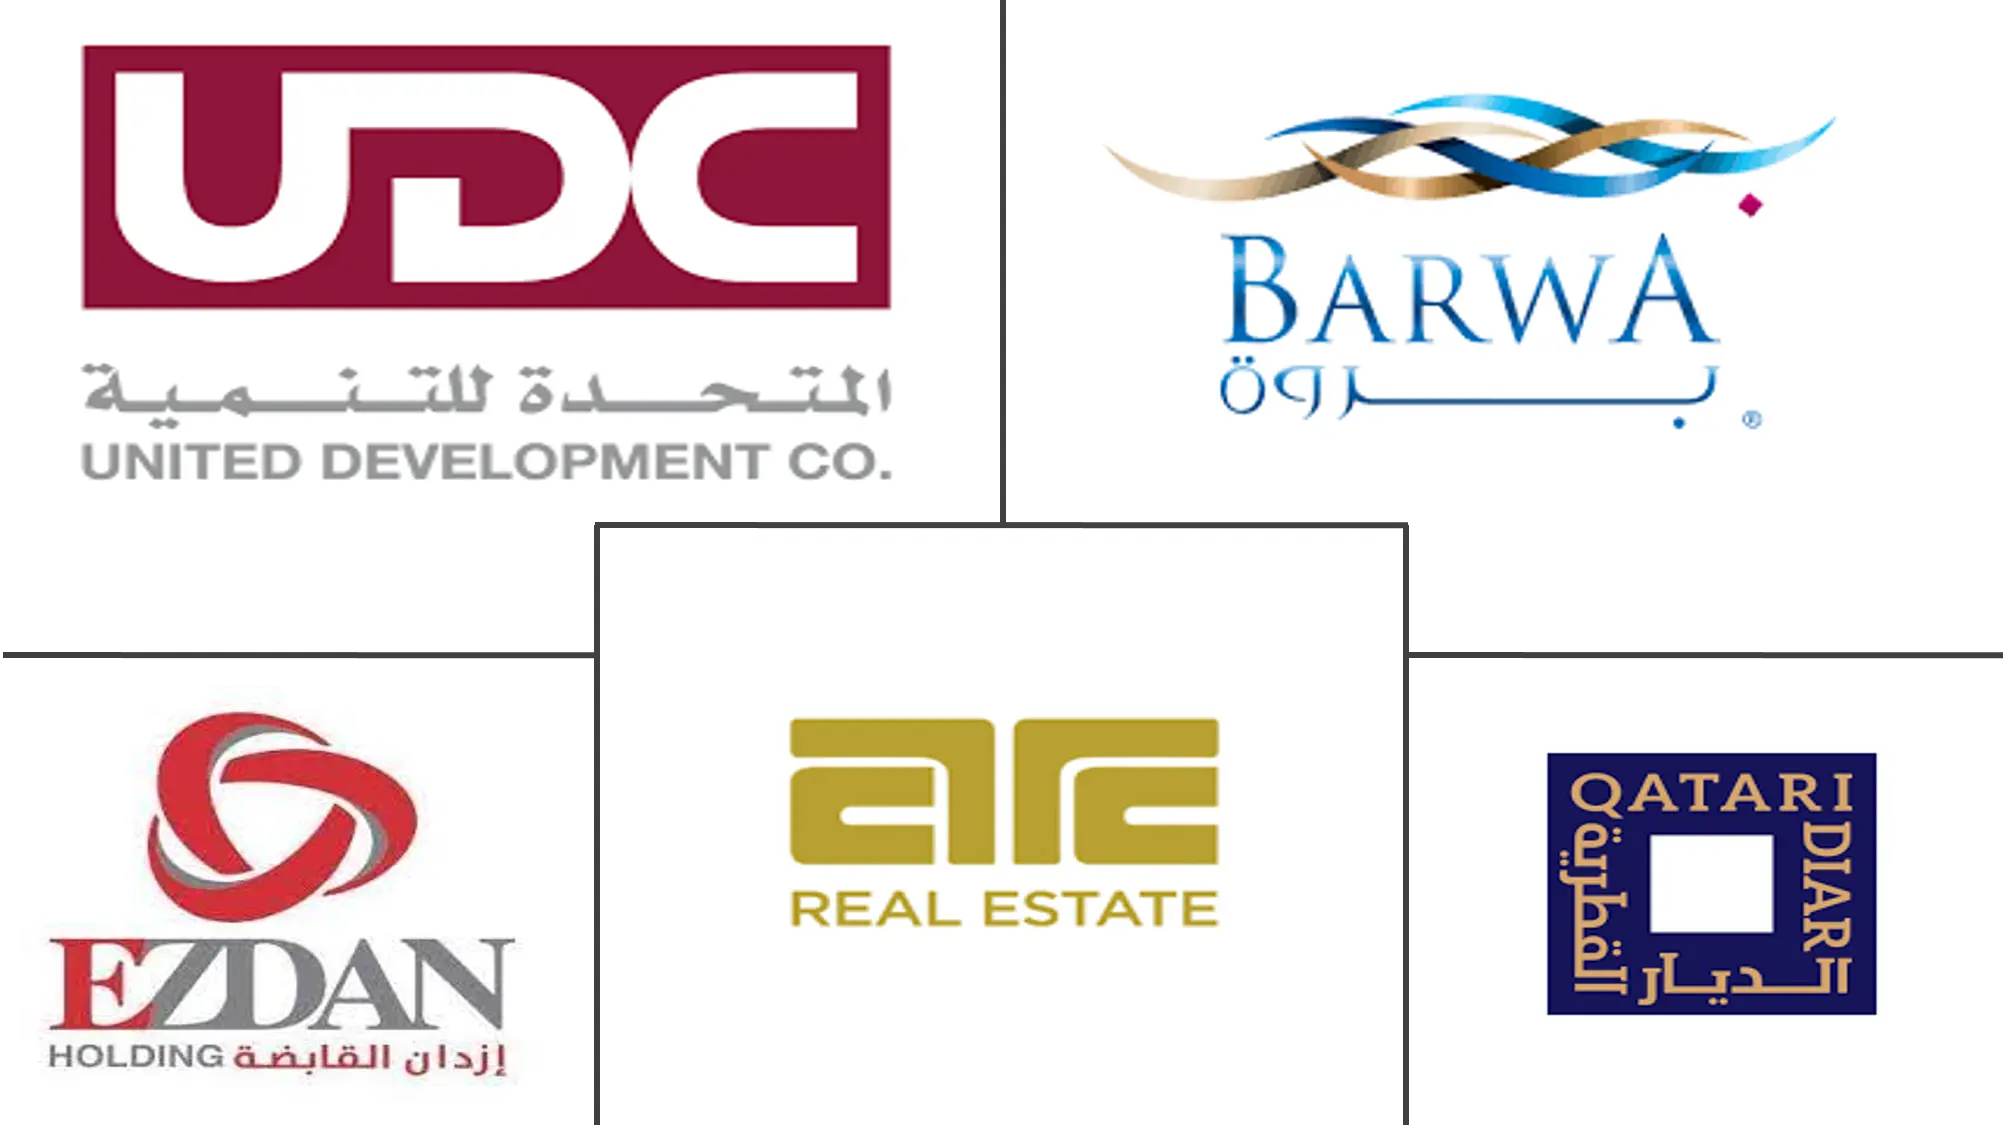 Qatar Residential Real Estate Market Major Players